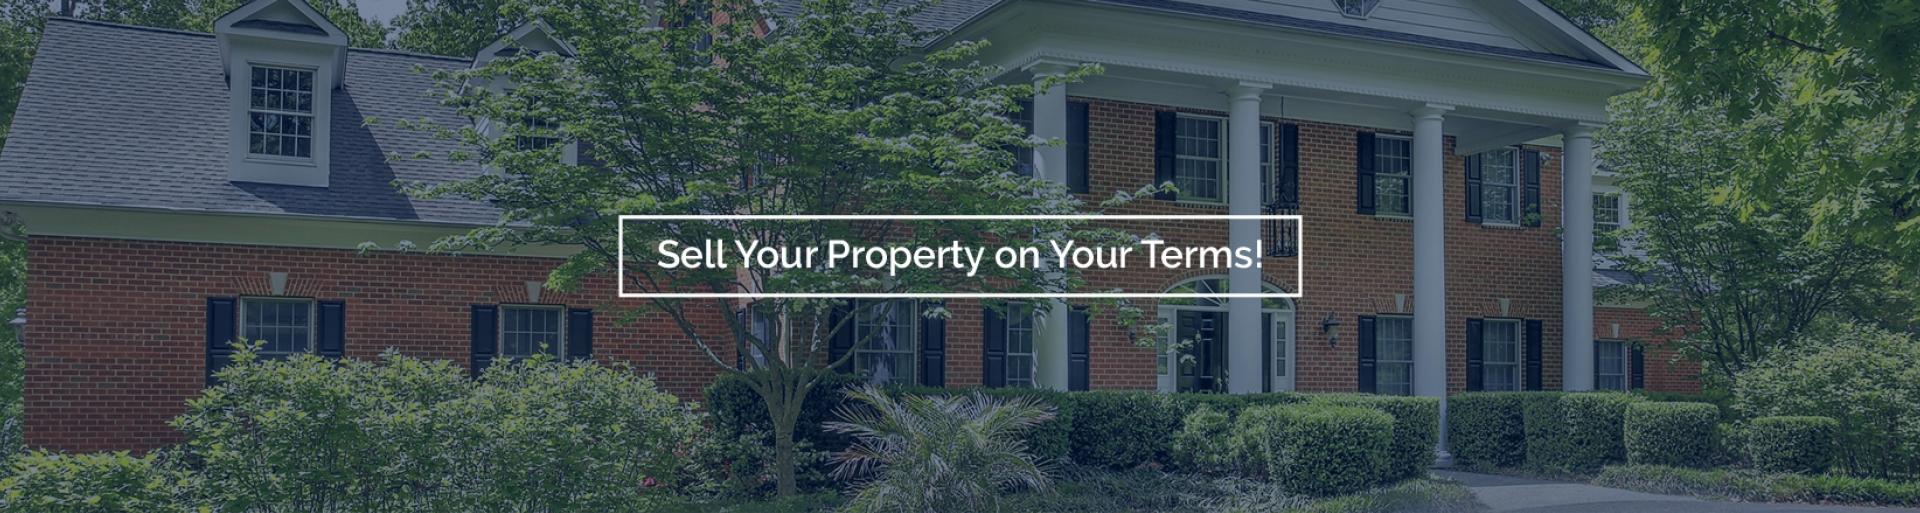 Sell Your Property on Your Terms!